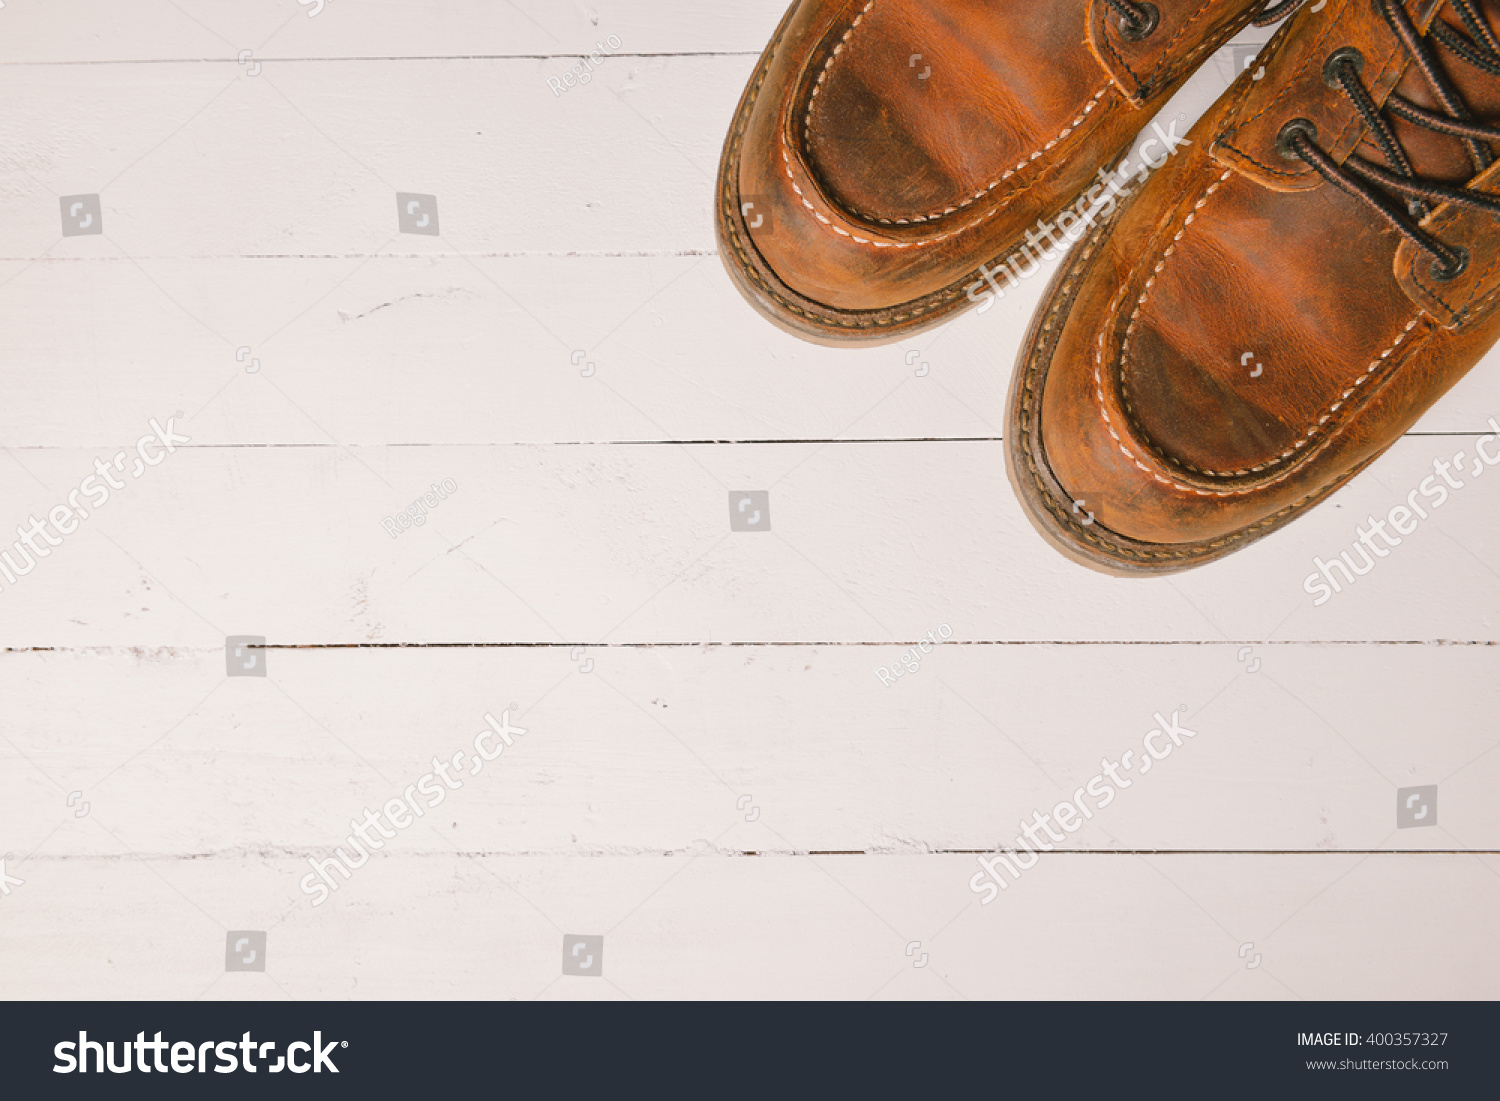 Old leather boot traditional leather style on wooden background with filter vintage style effect #400357327